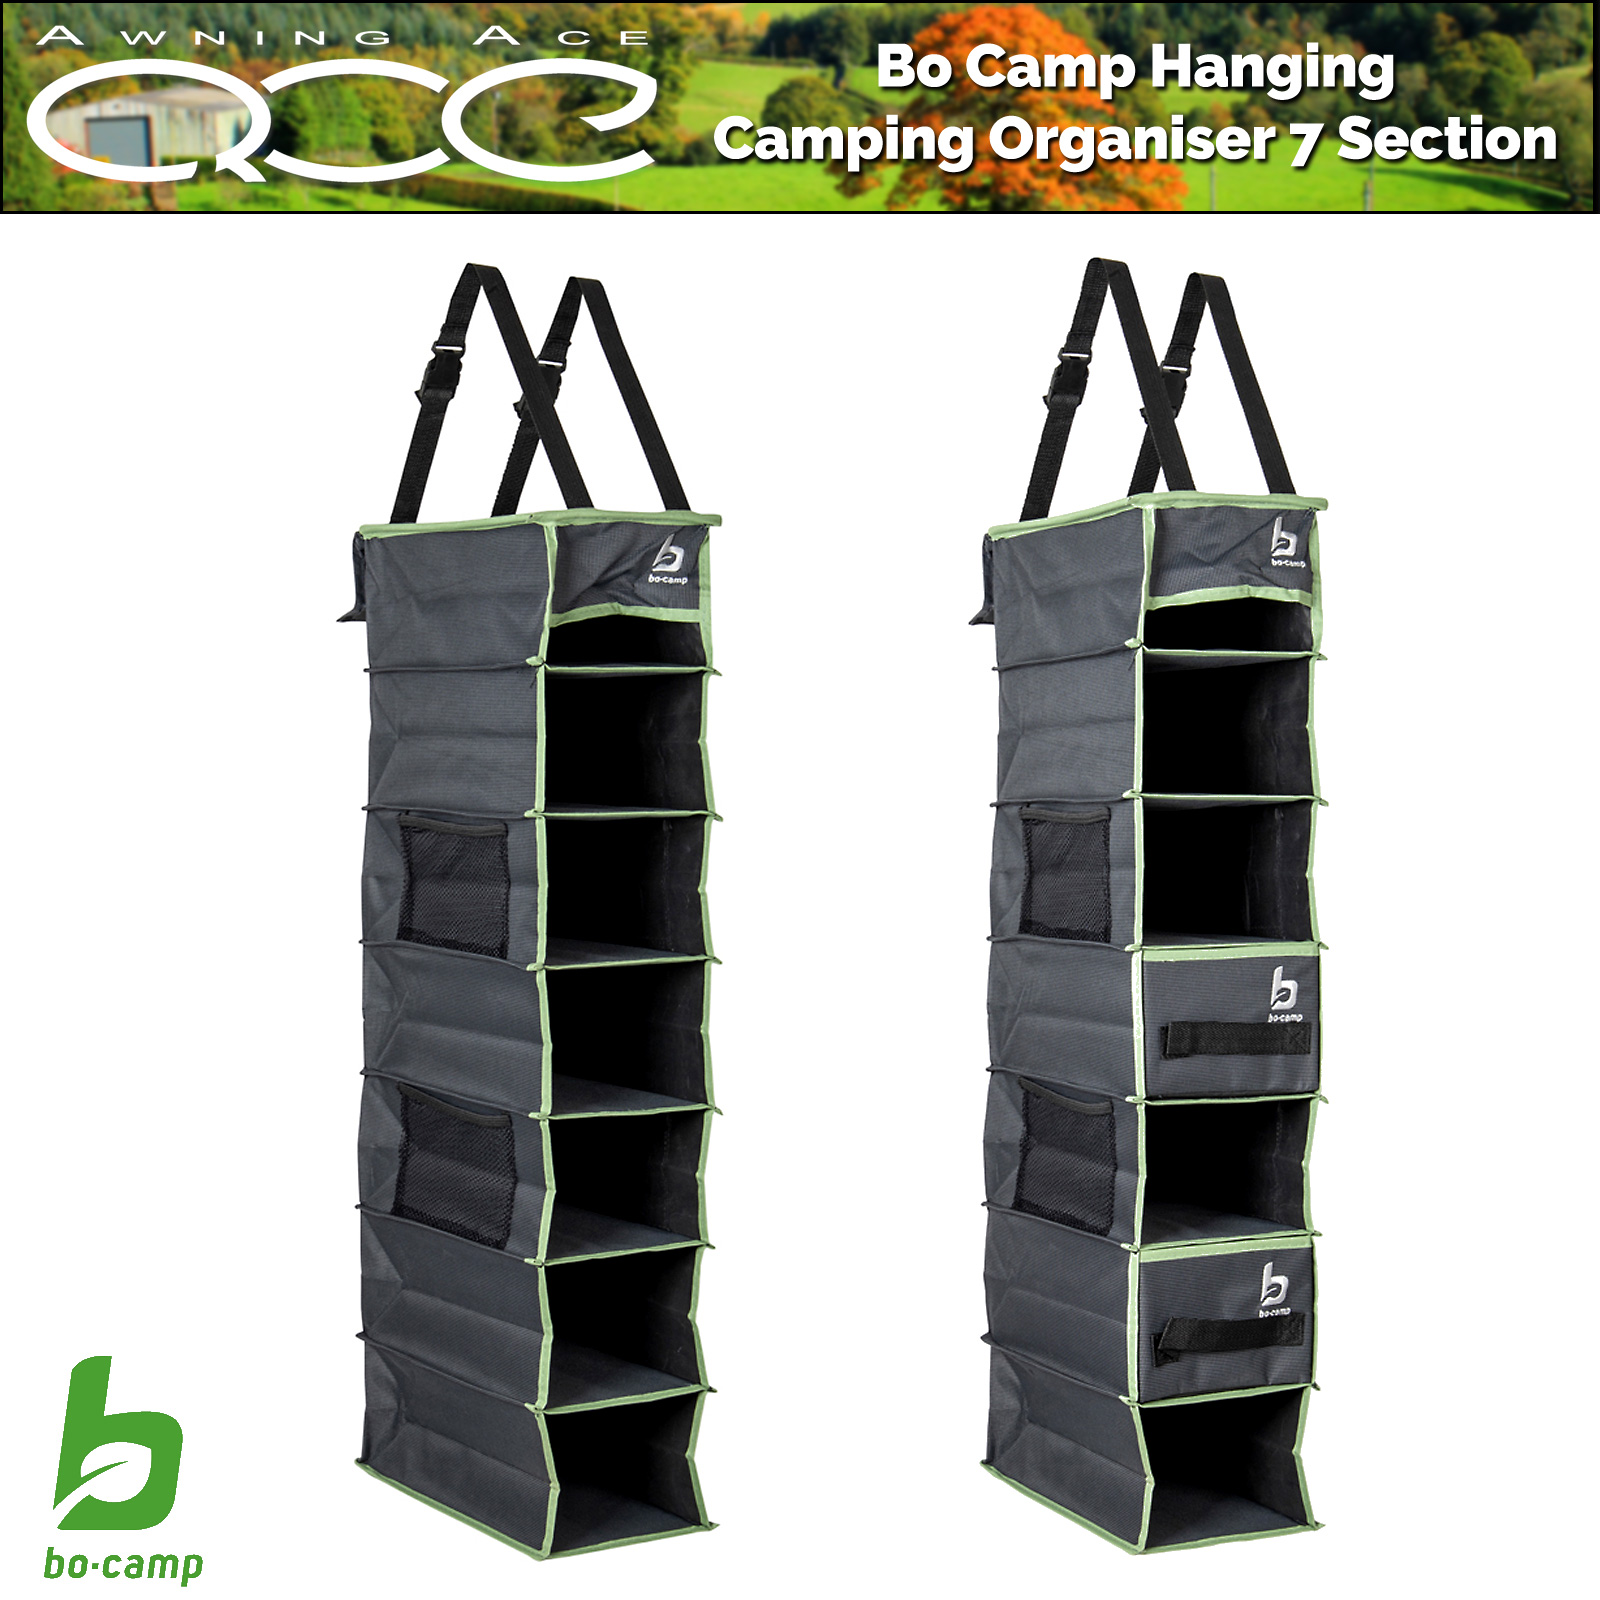 https://www.awningace.com/user/products/2022/Summerline/Bo-Camp-Hanging-Awning-Tent-Organiser-AA1.jpg